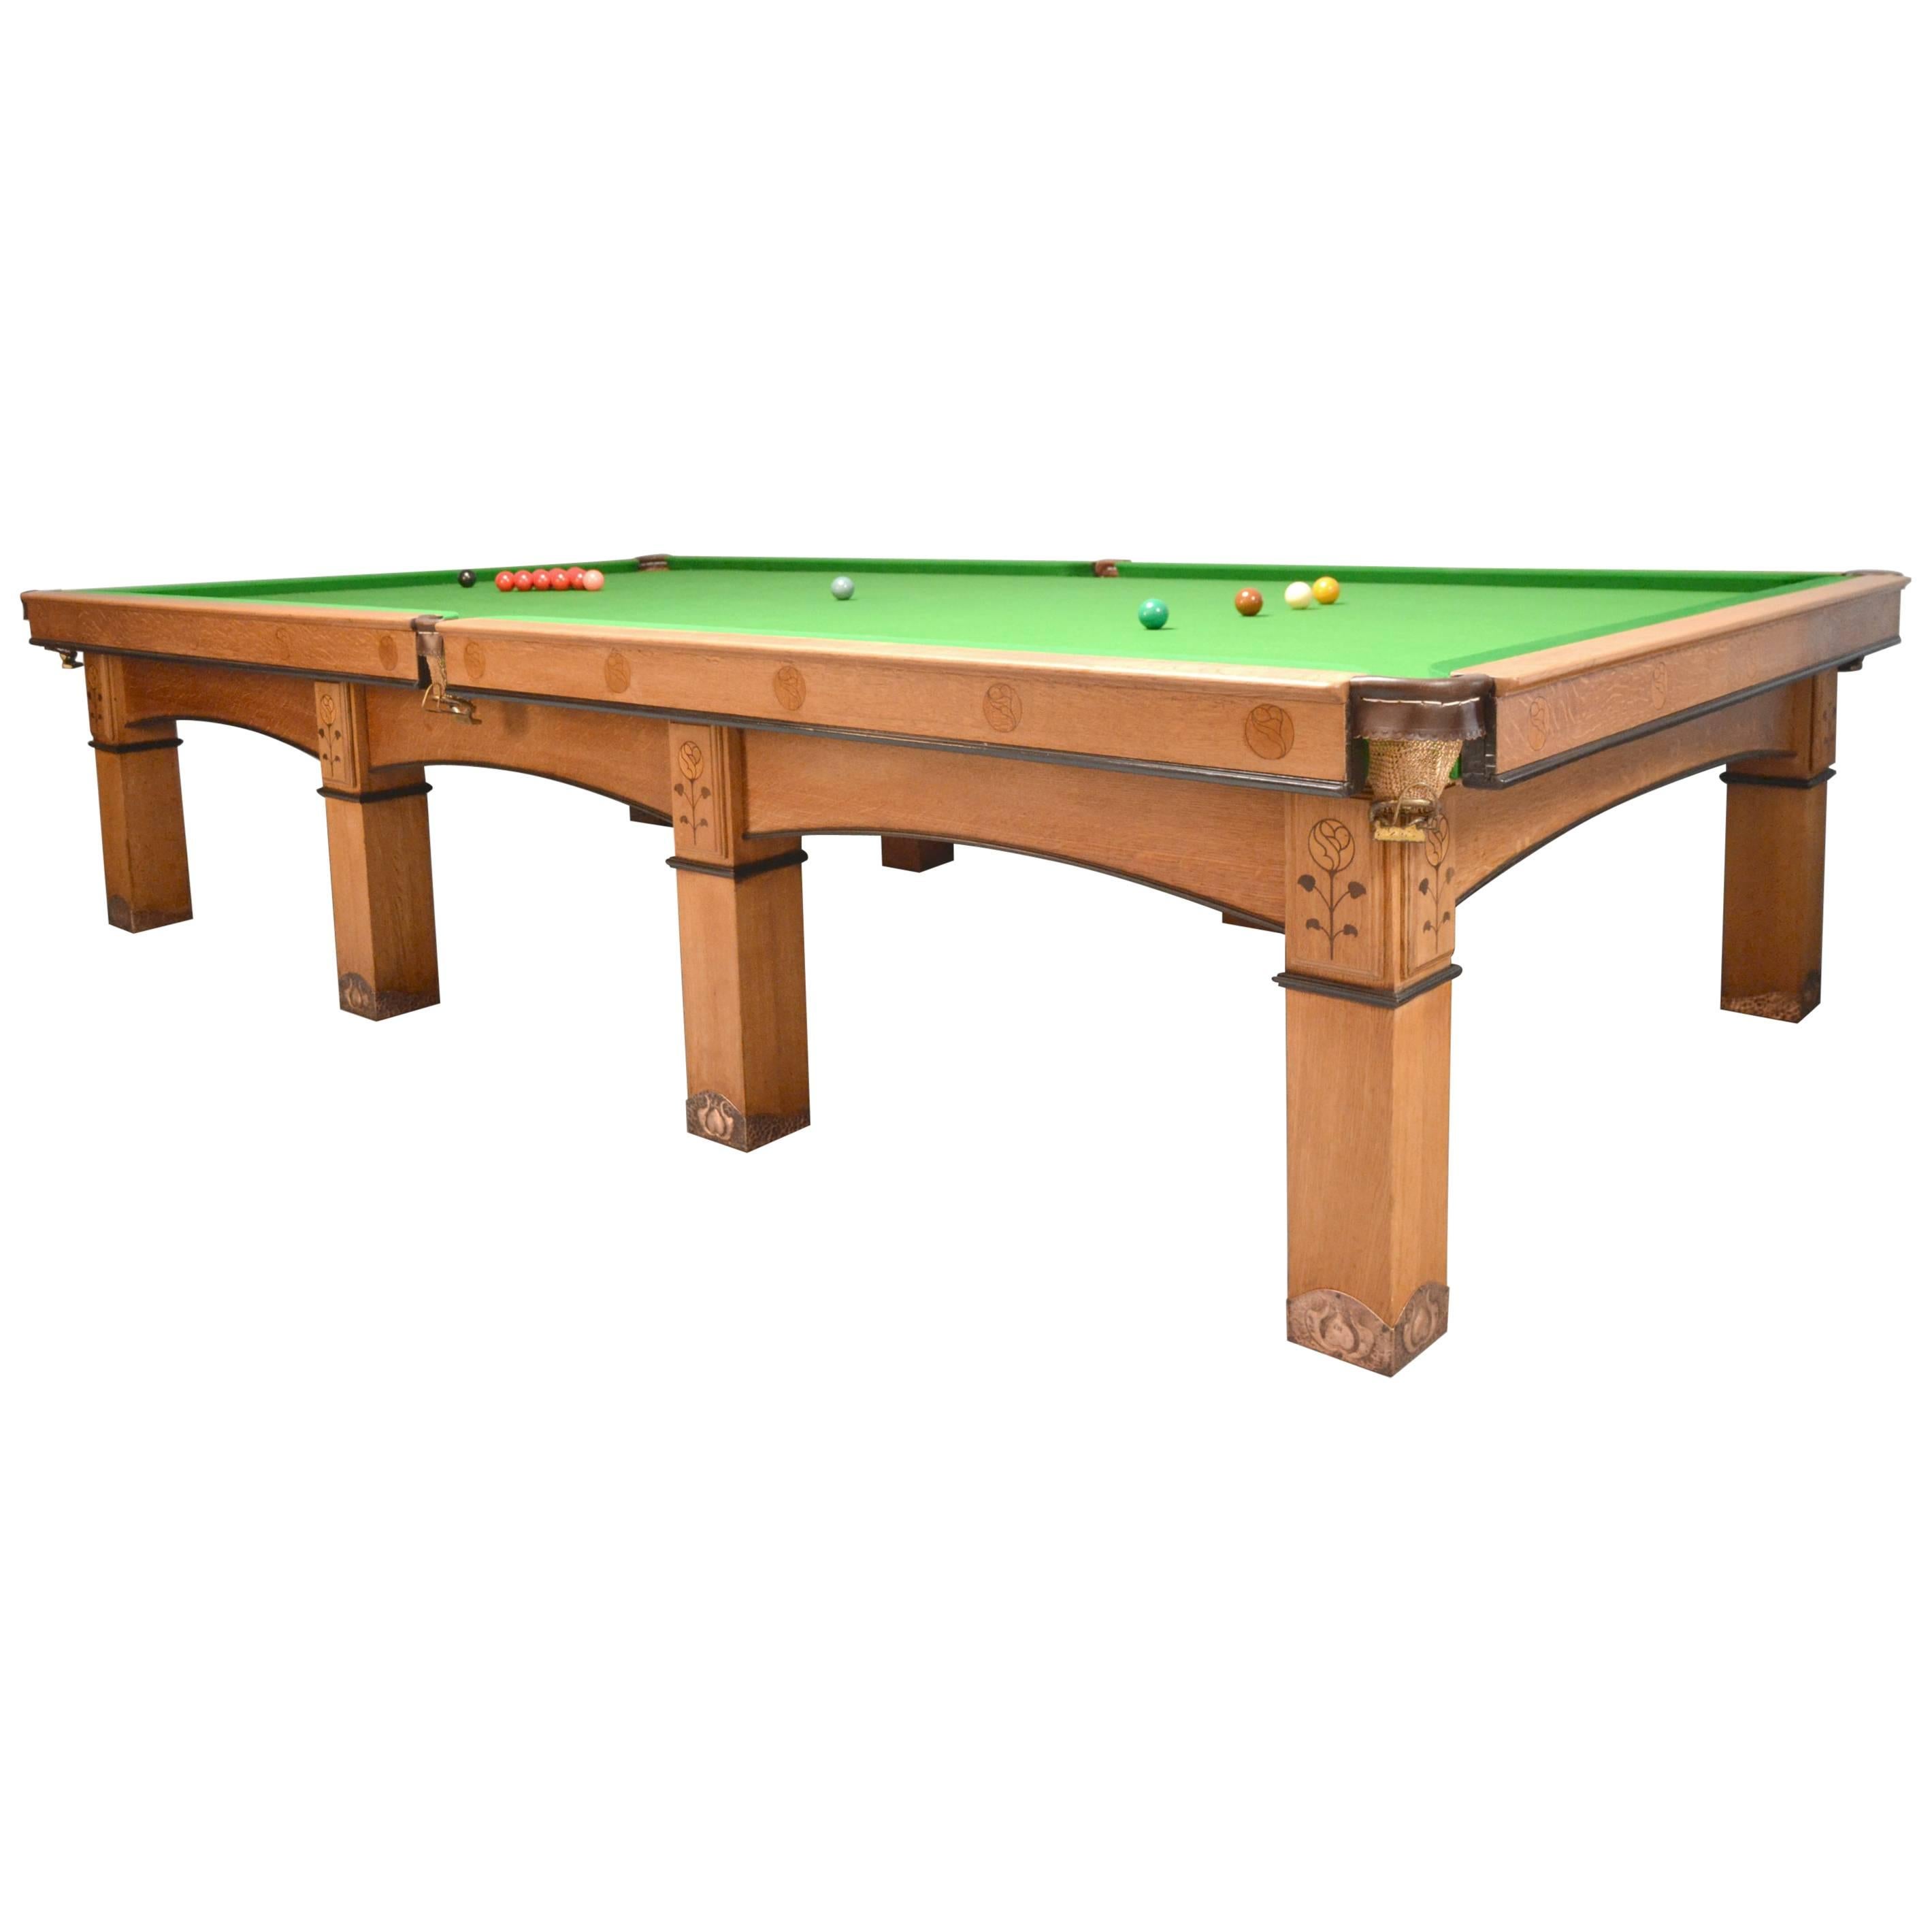 Billiard snooker pool table oak inlaid arts and crafts glasgow school scotland For Sale